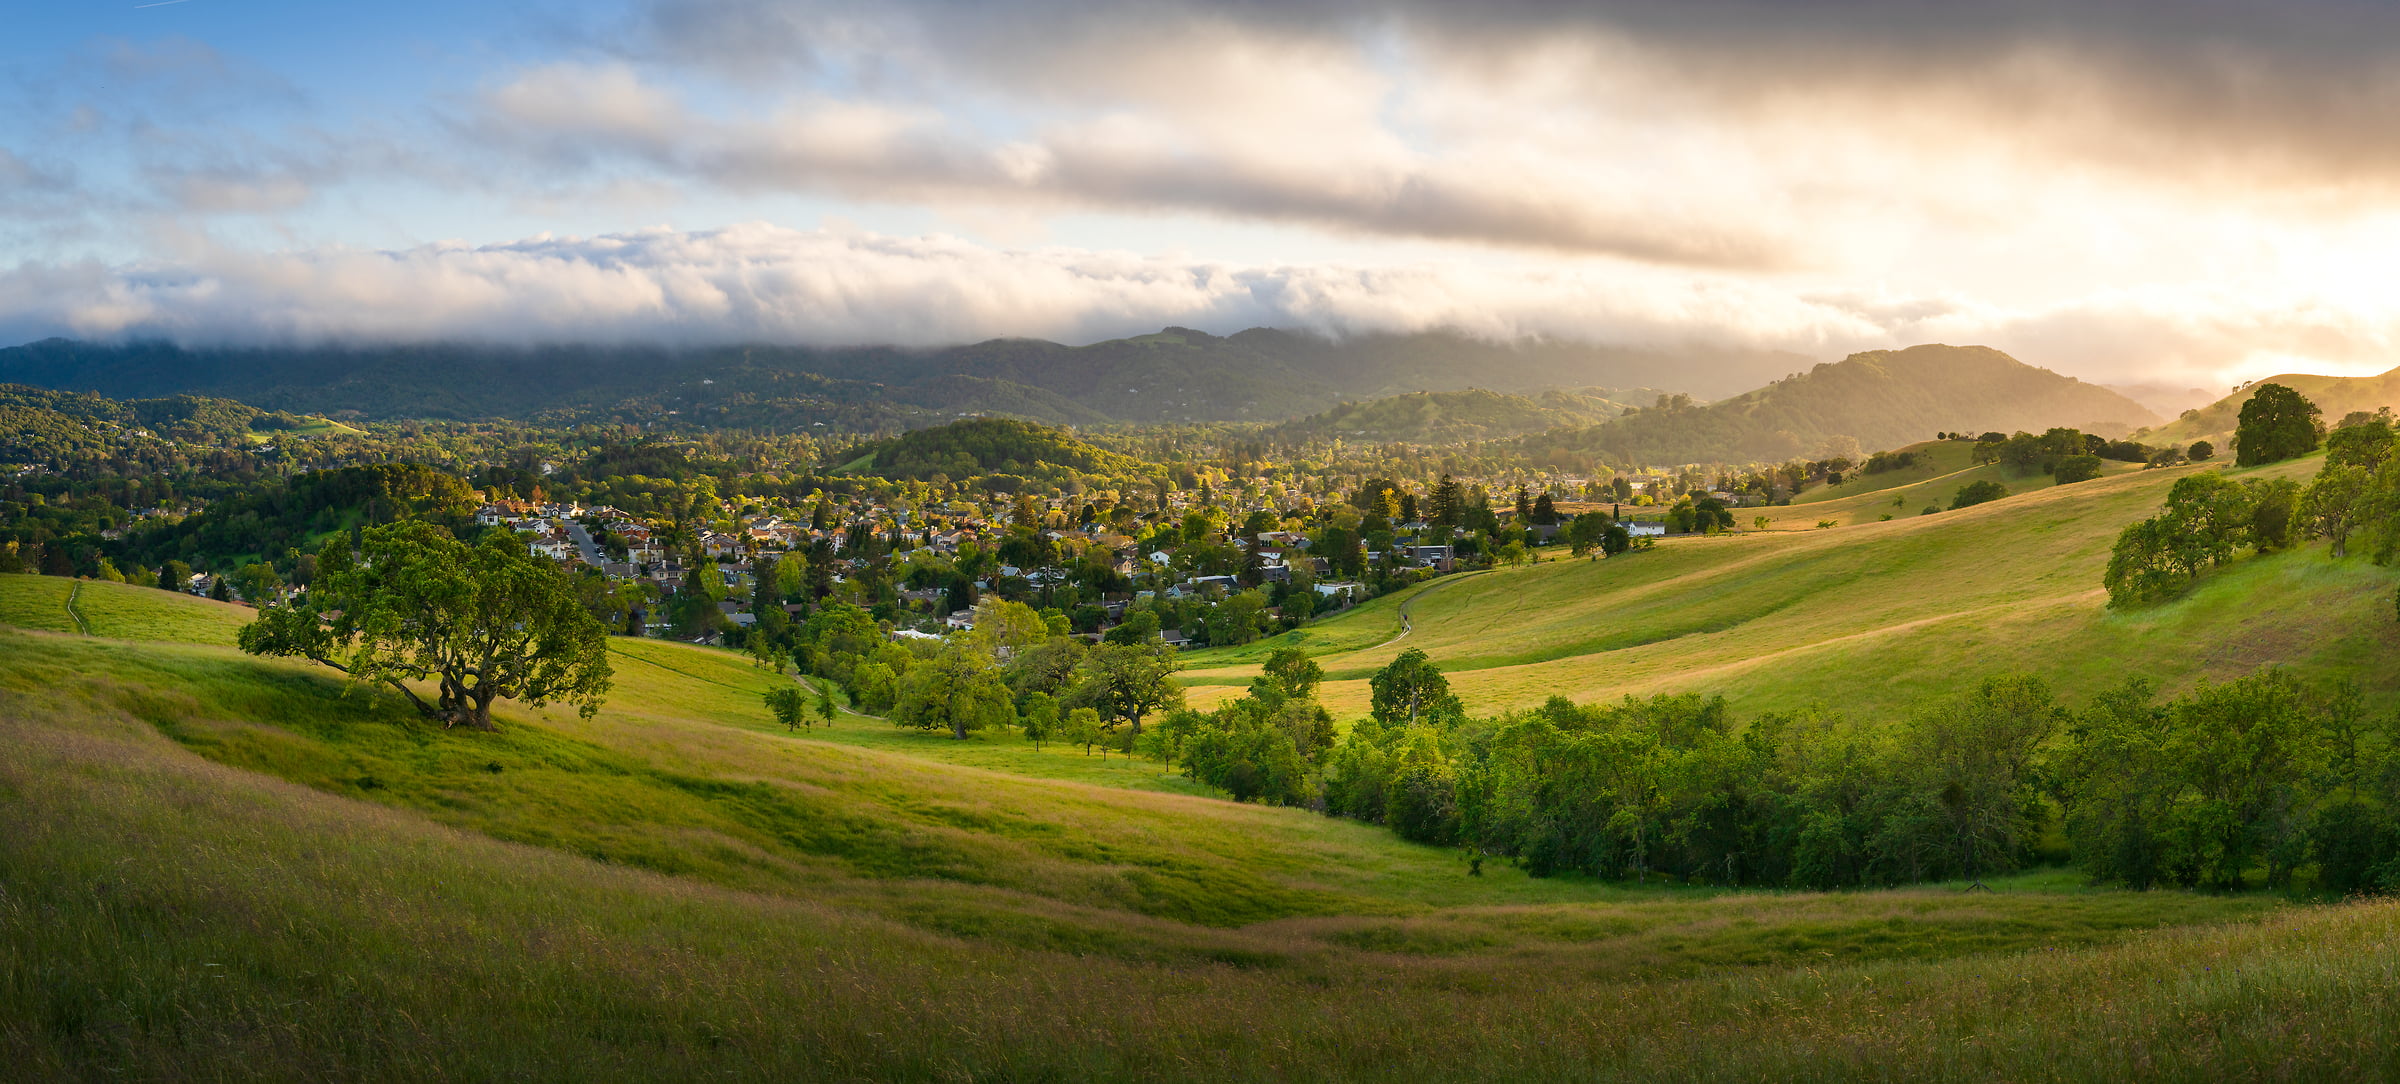 179 megapixels! A very high resolution, large-format VAST photo print of a green spring landscape with rolling hills; landscape photograph created by Jeff Lewis in Novato, California.